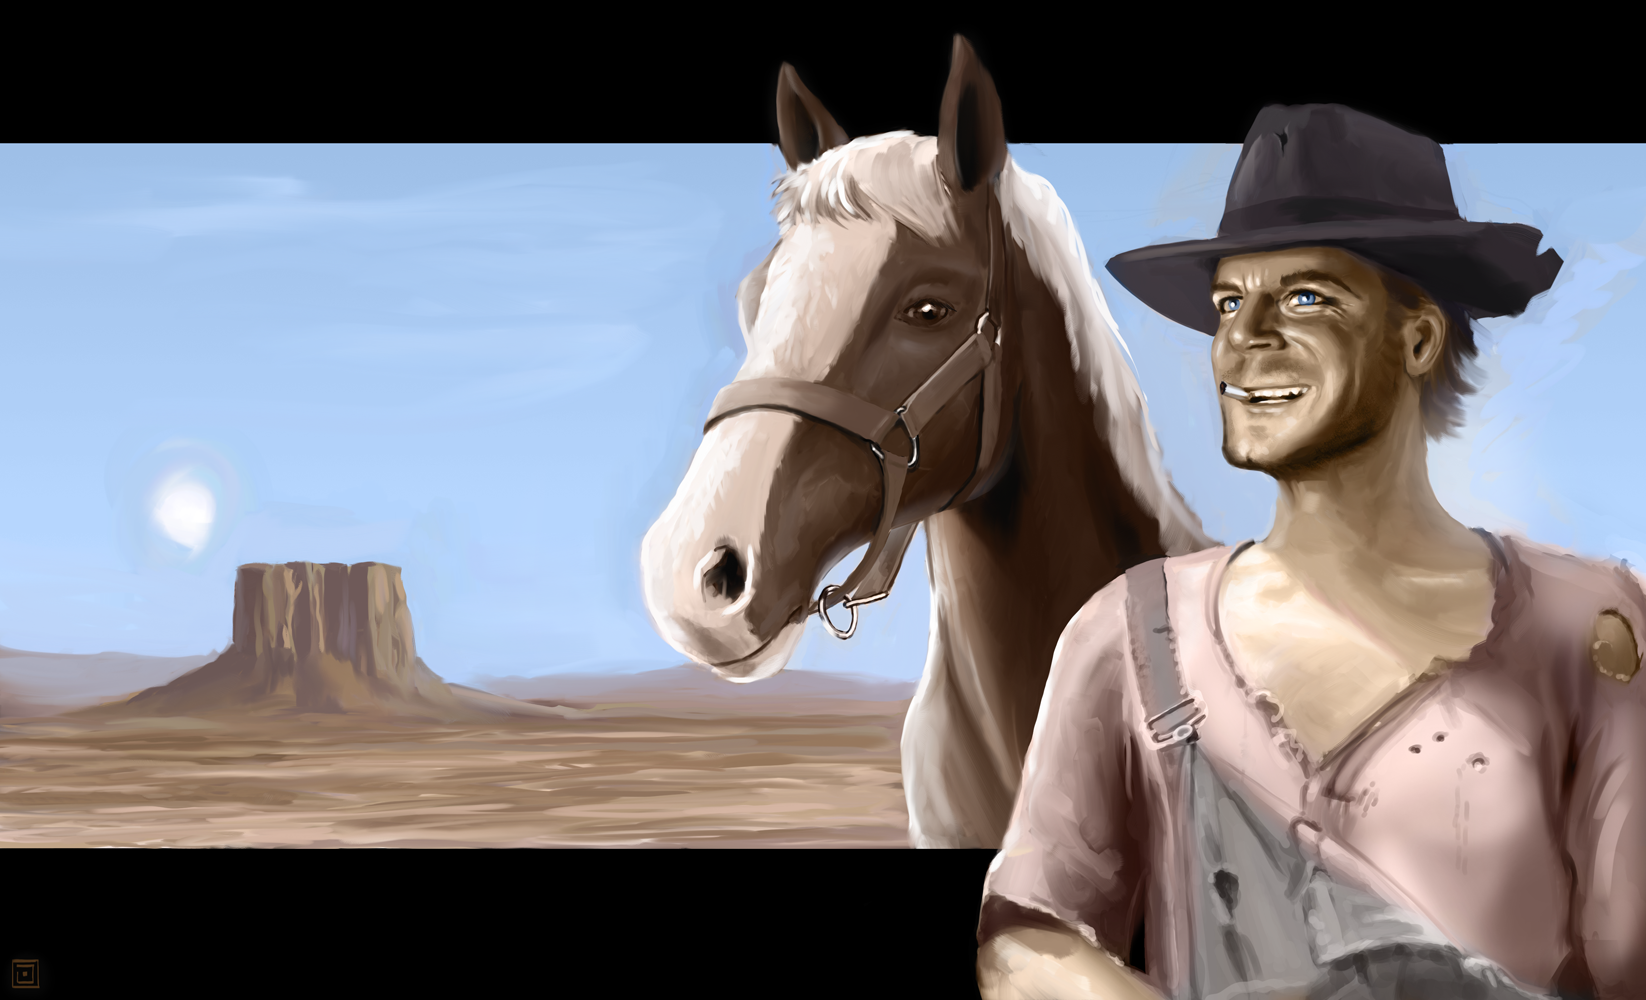 terence_hill_by_kaffeebohnson-d5os59d.png